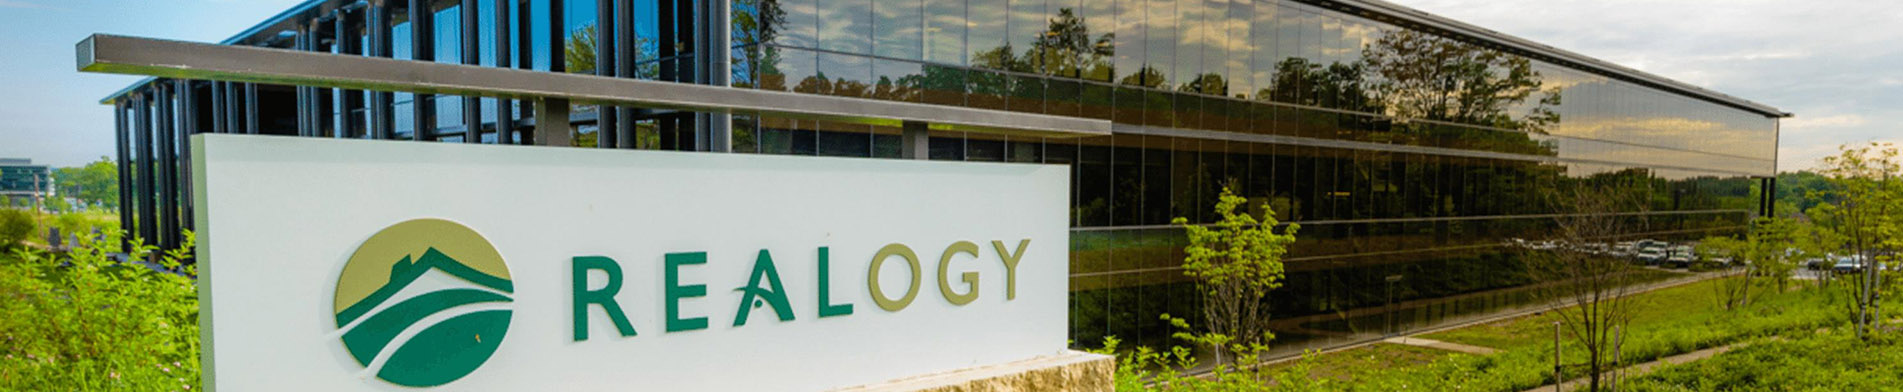 Realogy sign and building